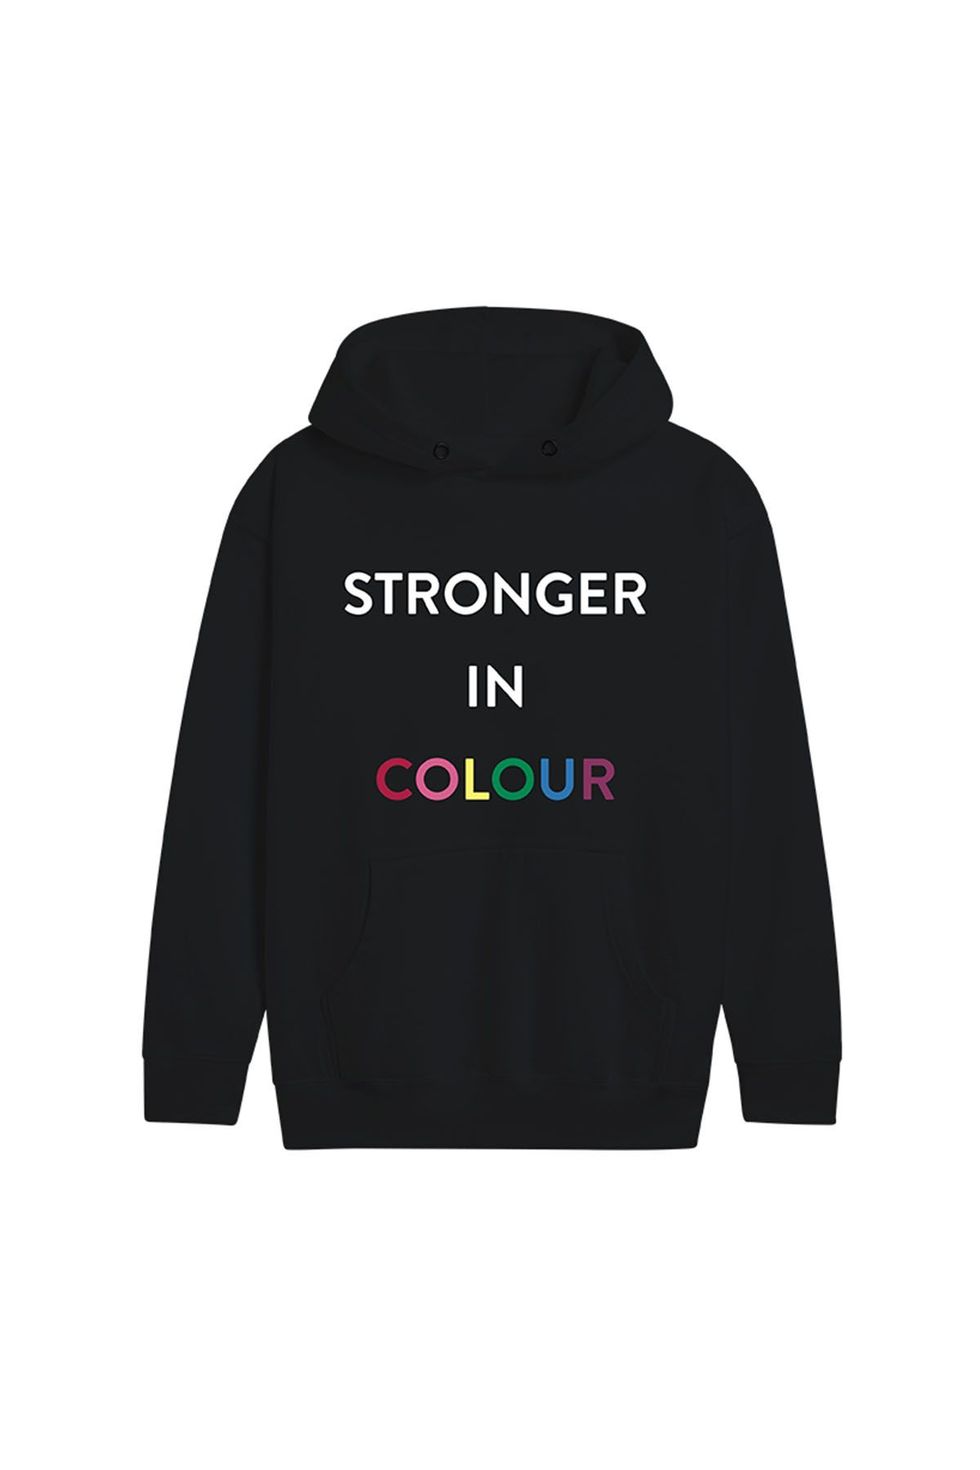 Stronger in Colour Hoodie